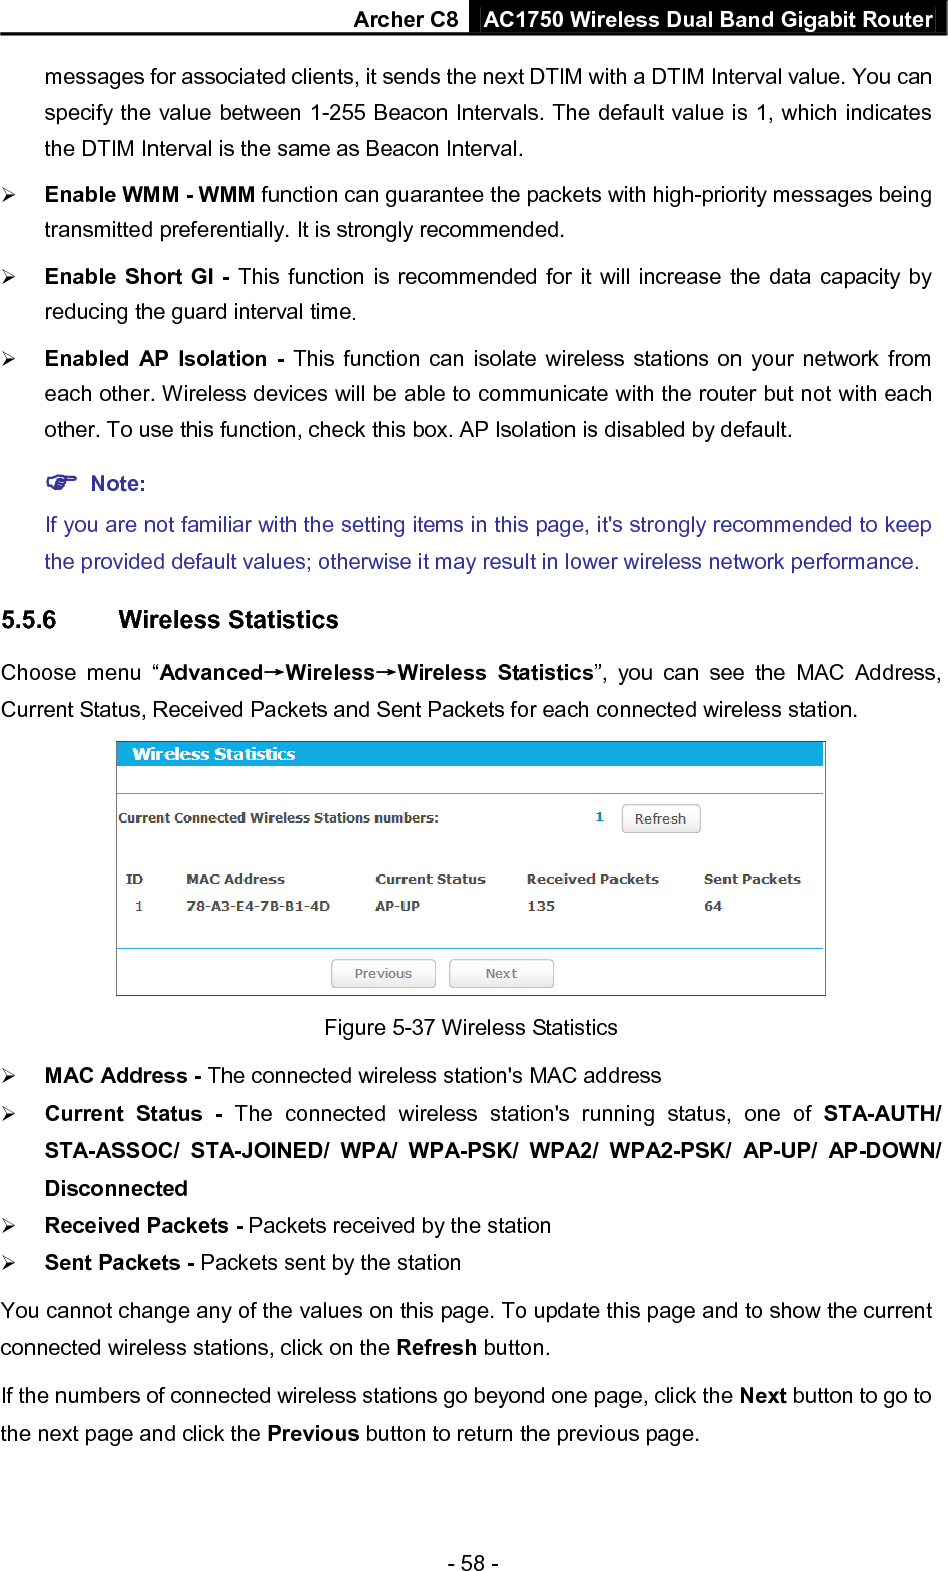 Archer C8 AC1750 Wireless Dual Band Gigabit Router  - 58 - messages for associated clients, it sends the next DTIM with a DTIM Interval value. You can specify the value between 1-255 Beacon Intervals. The default value is 1, which indicates the DTIM Interval is the same as Beacon Interval.    Enable WMM - WMM function can guarantee the packets with high-priority messages being transmitted preferentially. It is strongly recommended.    Enable Short GI - This function is recommended for it will increase the data capacity by reducing the guard interval time.    Enabled AP Isolation - This function can isolate wireless stations on your network from each other. Wireless devices will be able to communicate with the router but not with each other. To use this function, check this box. AP Isolation is disabled by default.  Note:   If you are not familiar with the setting items in this page, it&apos;s strongly recommended to keep the provided default values; otherwise it may result in lower wireless network performance. 5.5.6 Wireless Statistics Choose menu “Advanced→Wireless→Wireless Statistics”, you can see the MAC Address, Current Status, Received Packets and Sent Packets for each connected wireless station.  Figure 5-37 Wireless Statistics  MAC Address - The connected wireless station&apos;s MAC address  Current Status - The connected wireless station&apos;s running status, one of STA-AUTH/ STA-ASSOC/ STA-JOINED/ WPA/ WPA-PSK/ WPA2/ WPA2-PSK/ AP-UP/ AP-DOWN/ Disconnected  Received Packets - Packets received by the station  Sent Packets - Packets sent by the station You cannot change any of the values on this page. To update this page and to show the current connected wireless stations, click on the Refresh button.   If the numbers of connected wireless stations go beyond one page, click the Next button to go to the next page and click the Previous button to return the previous page. 